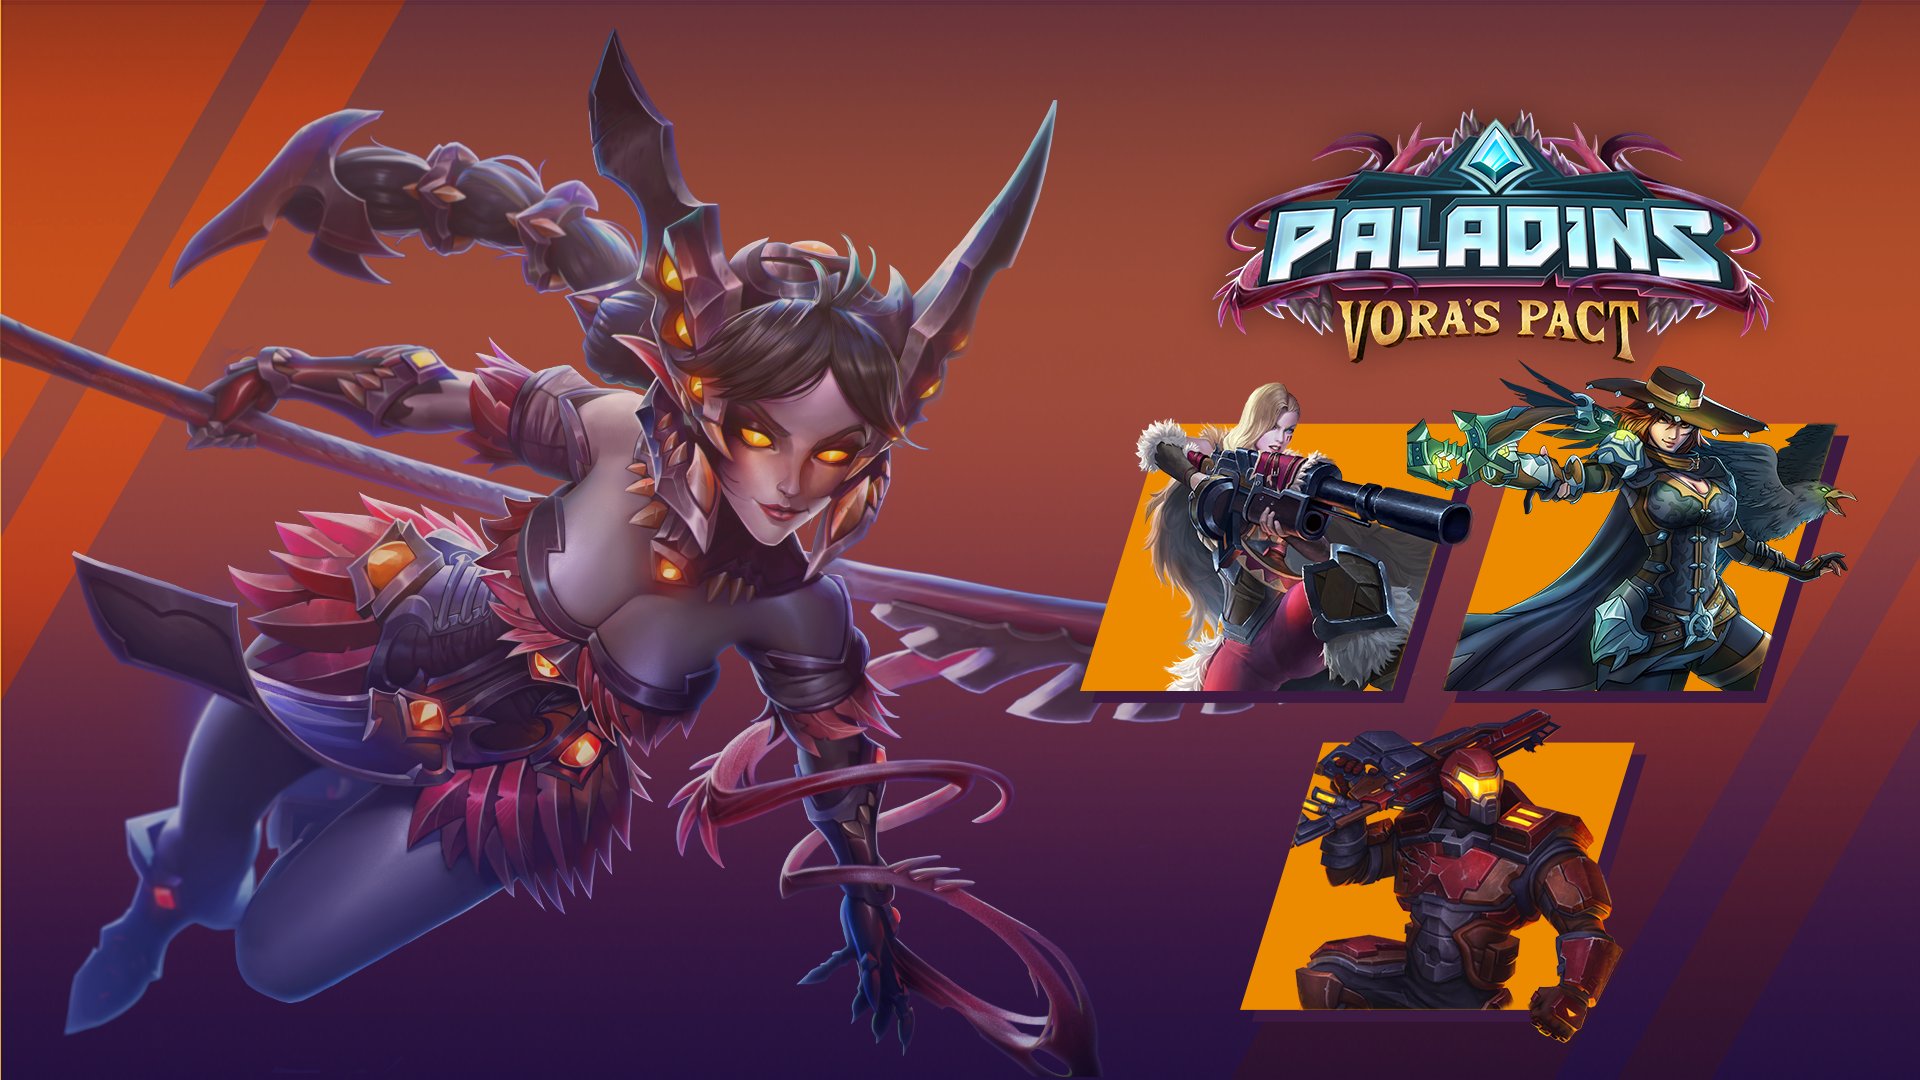 eftermiddag berømmelse Zoologisk have Paladins: The Game on Twitter: "📣Attention all PS4 Champions📣 If you have  Playstation+ you can now get the Paladins Vora Plus Bundle Free! This  includes: ✓Vora ✓Tyra ✓V1-KTOR Viktor Skin ✓Night Bane